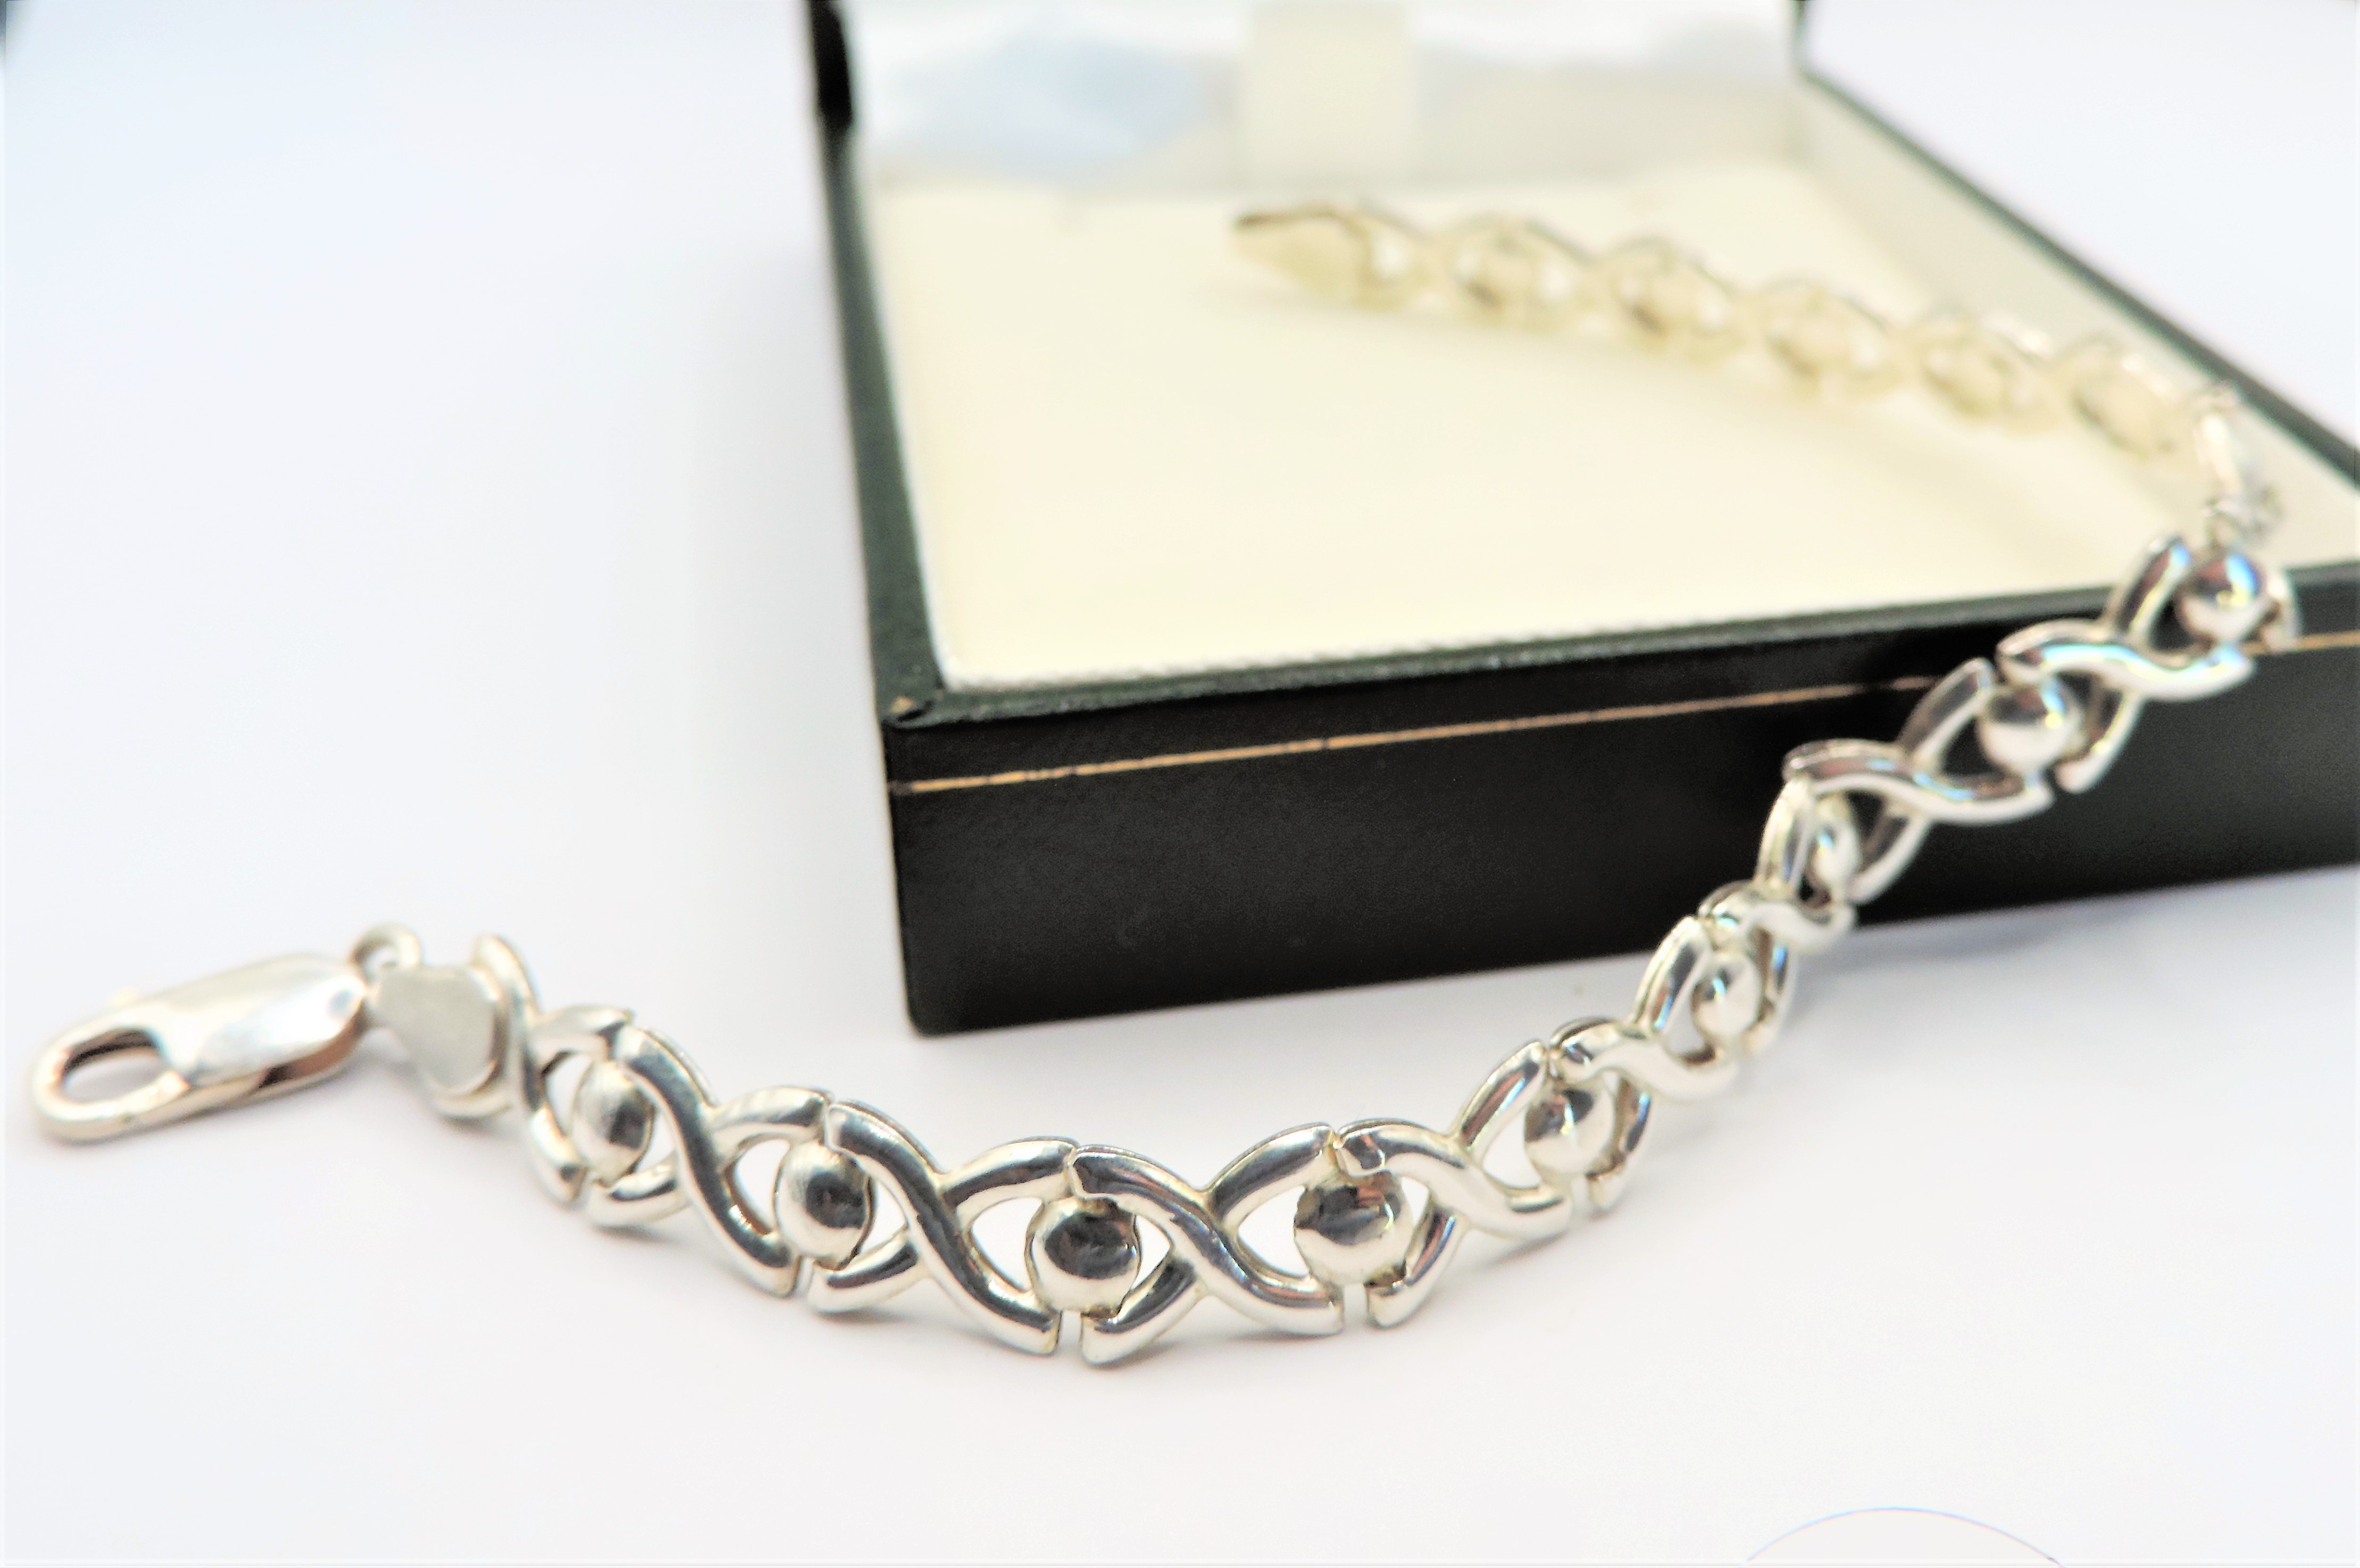 925 Sterling Silver Bracelet Made in Italy with Gift Box - Image 2 of 3